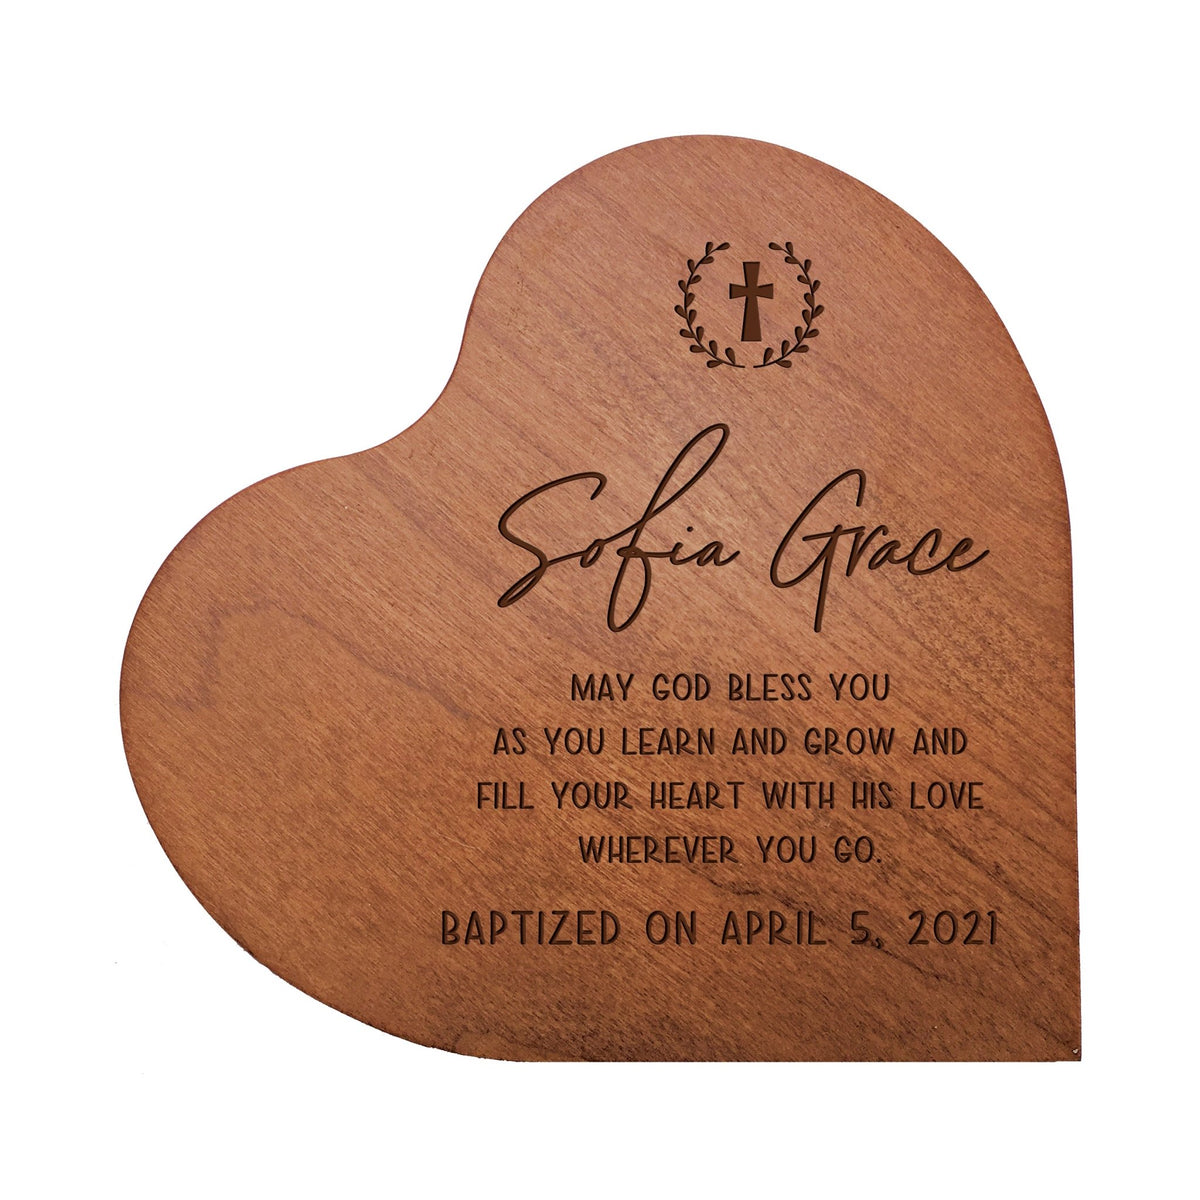 Personalized Baptism Solid Wood Heart Decoration With Inspirational Verse Keepsake Gift 5x5.25 - May God Bless You - LifeSong Milestones